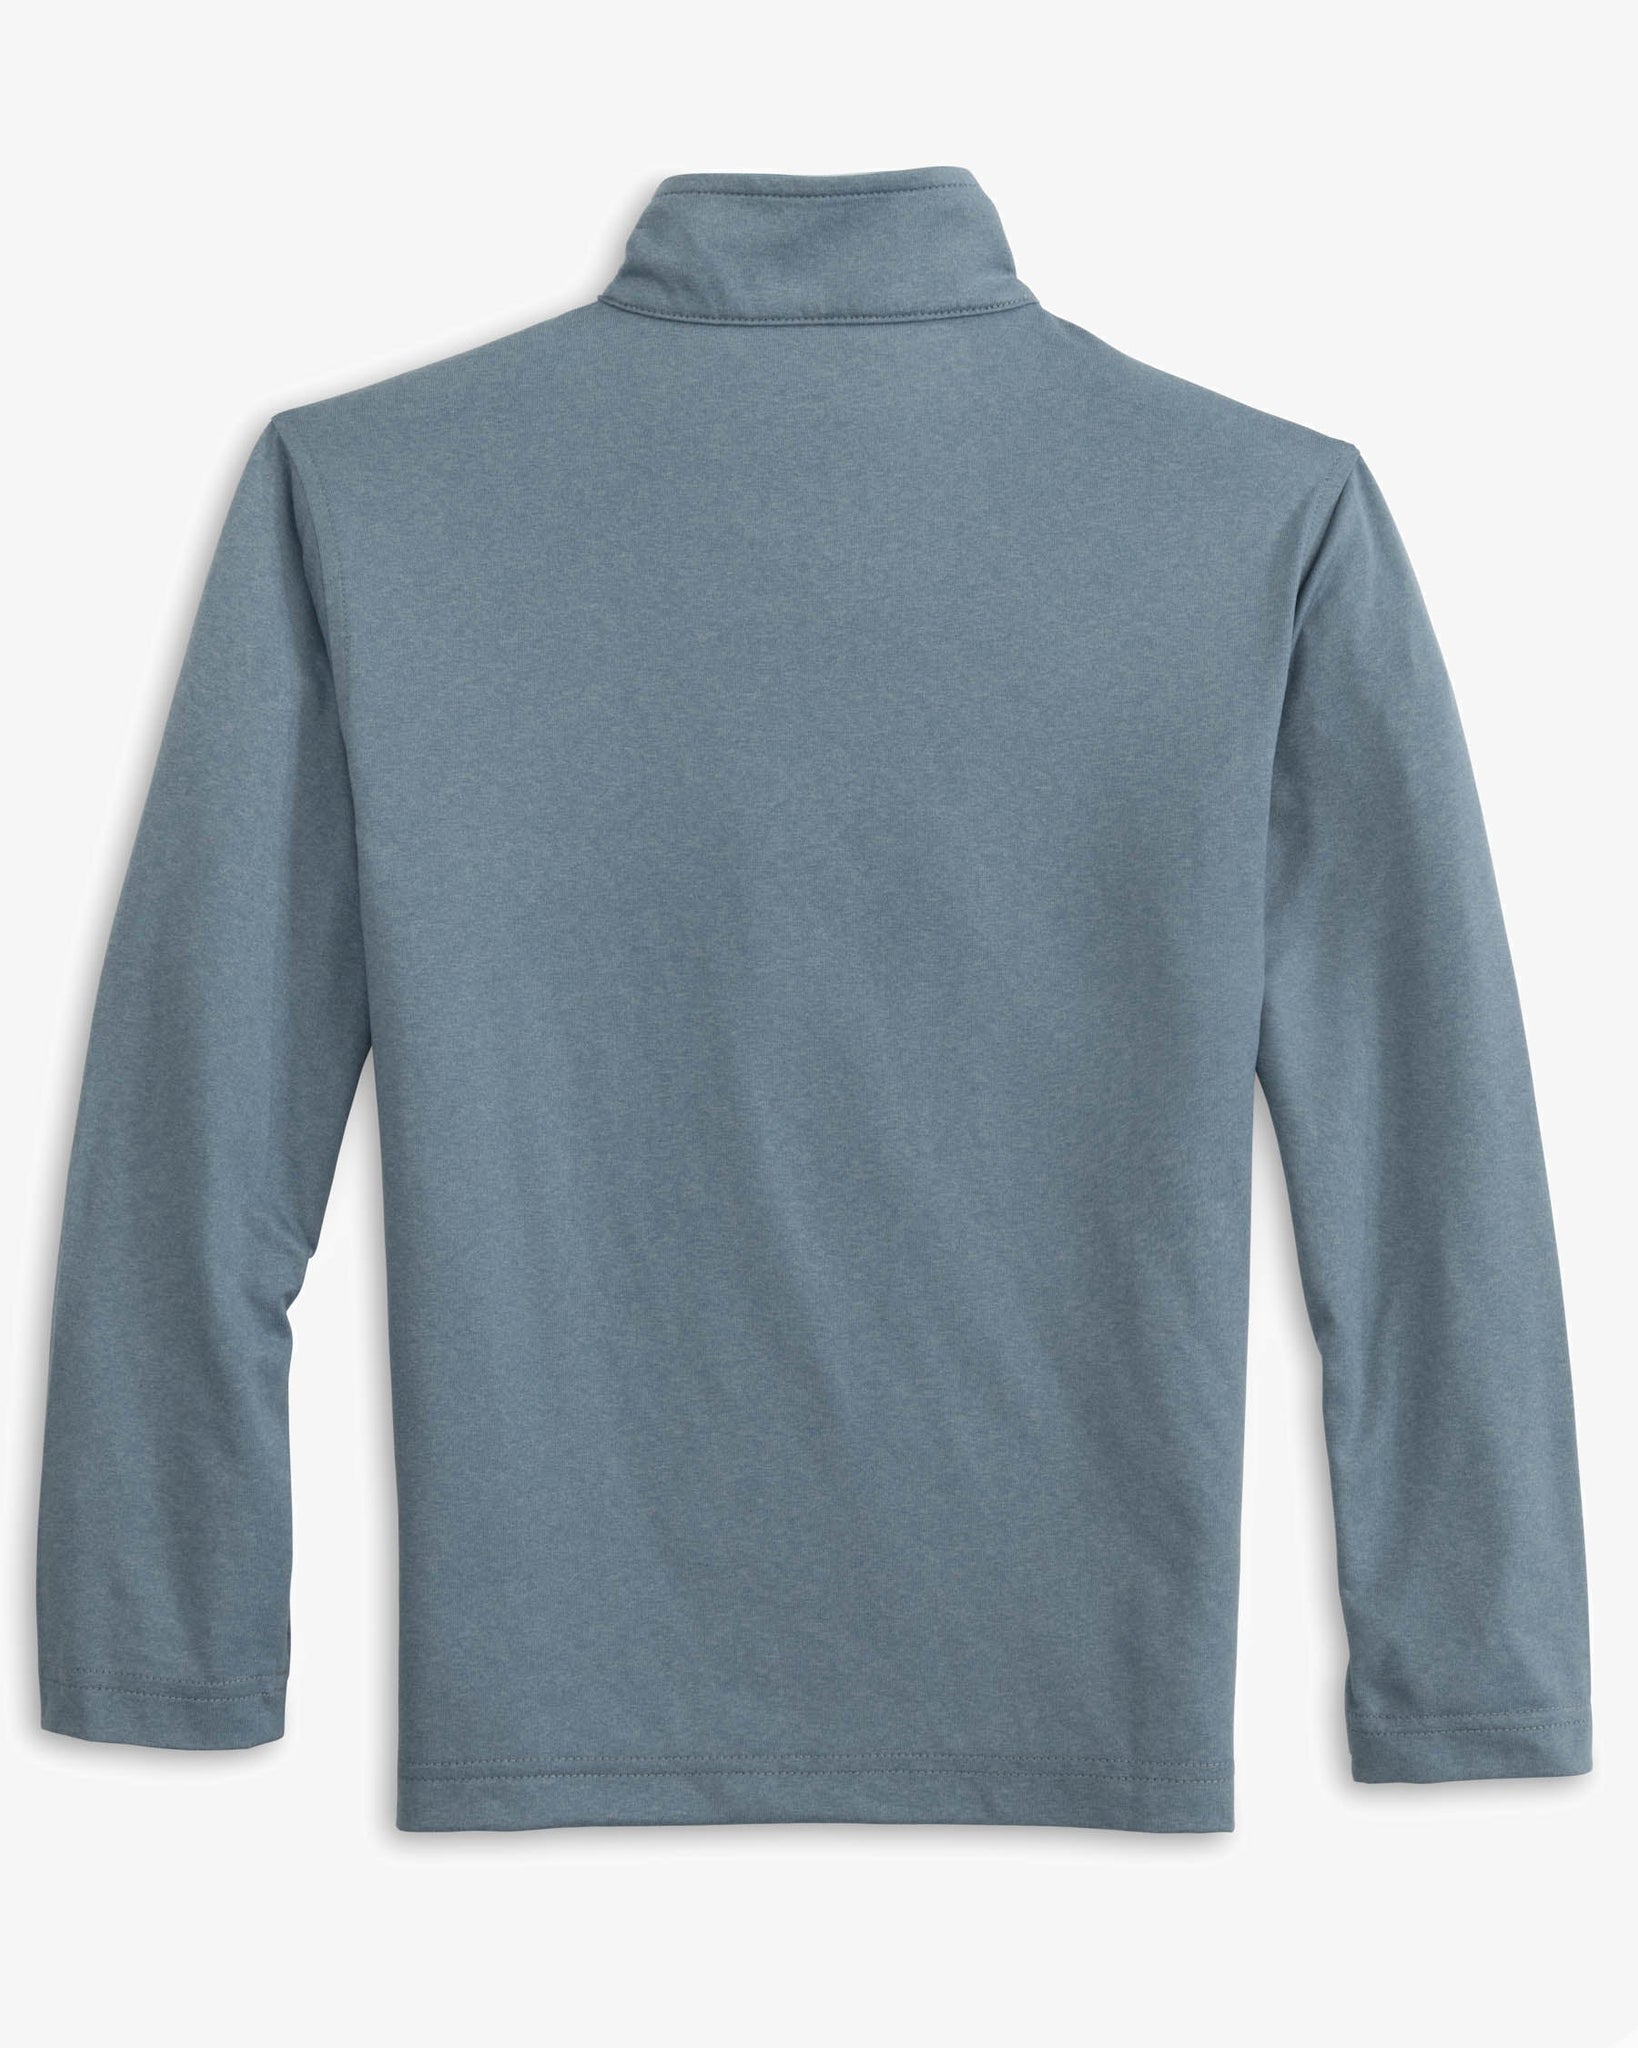 The back view of the Youth Backbarrier Heather Performance Quarter Zip Pullover by Southern Tide - Heather Blue Haze